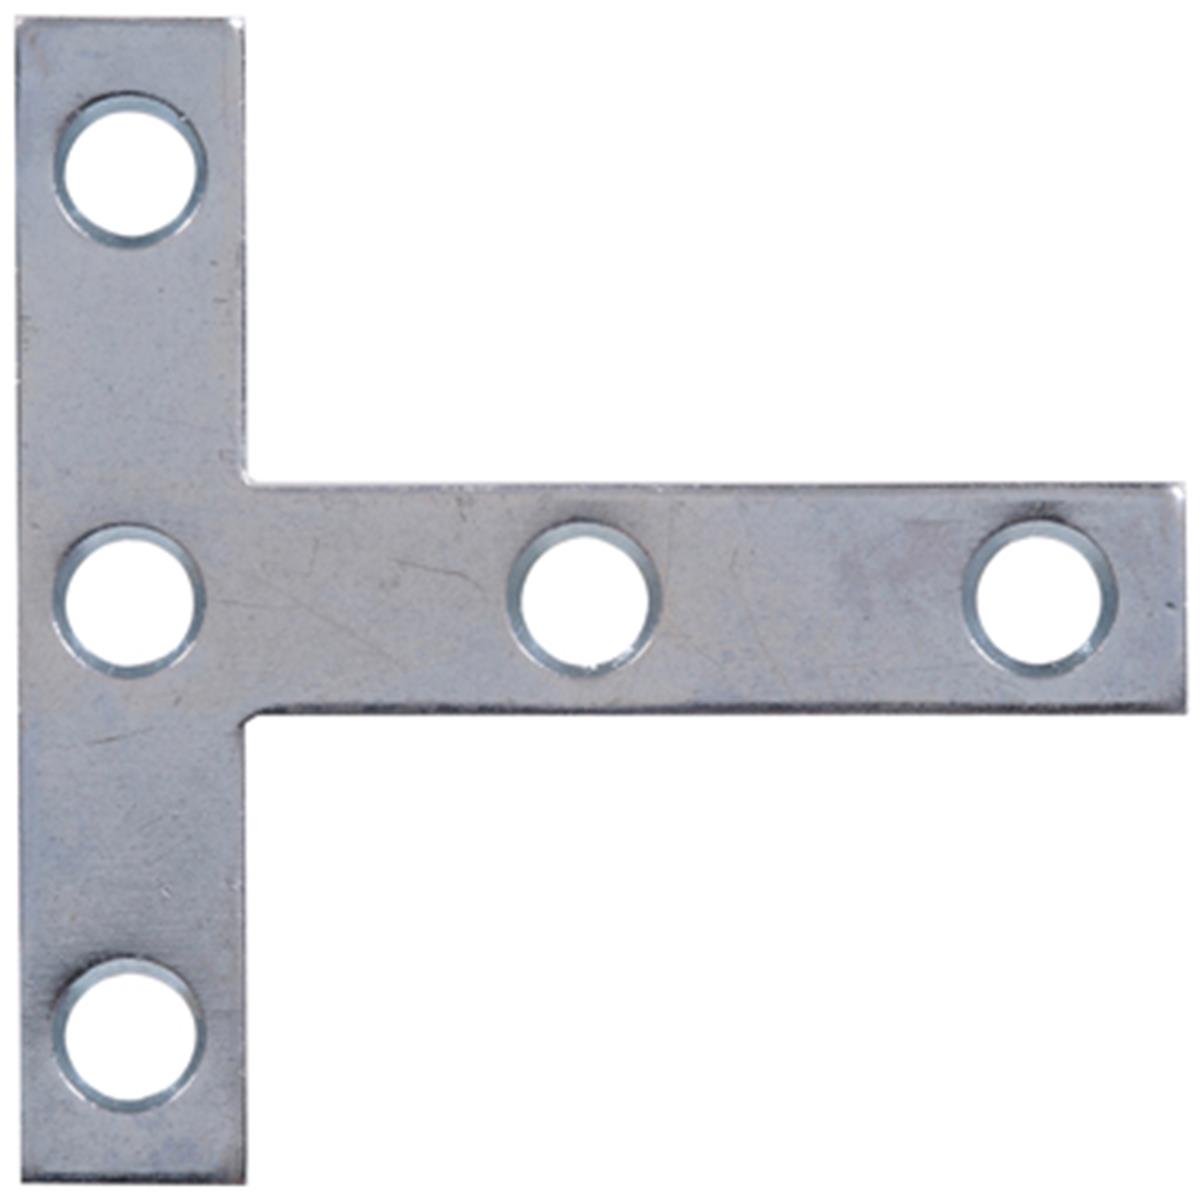 3 X 3 In. Zinc Plated T-plate